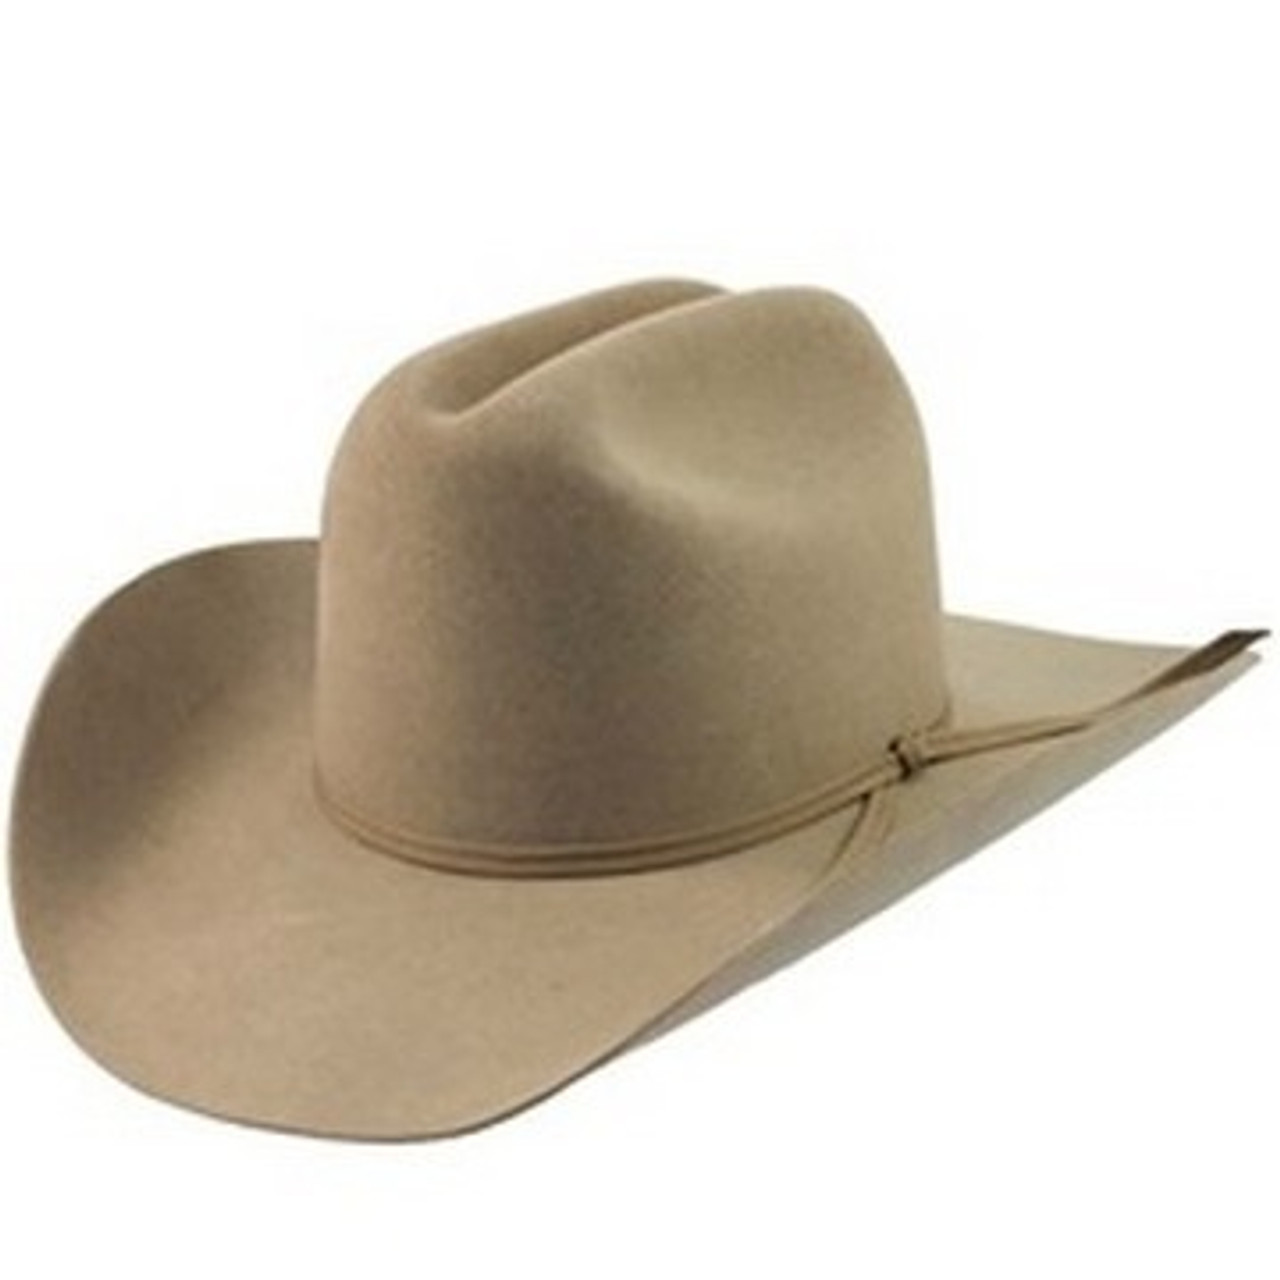 billy the kid stetson cowboy hat